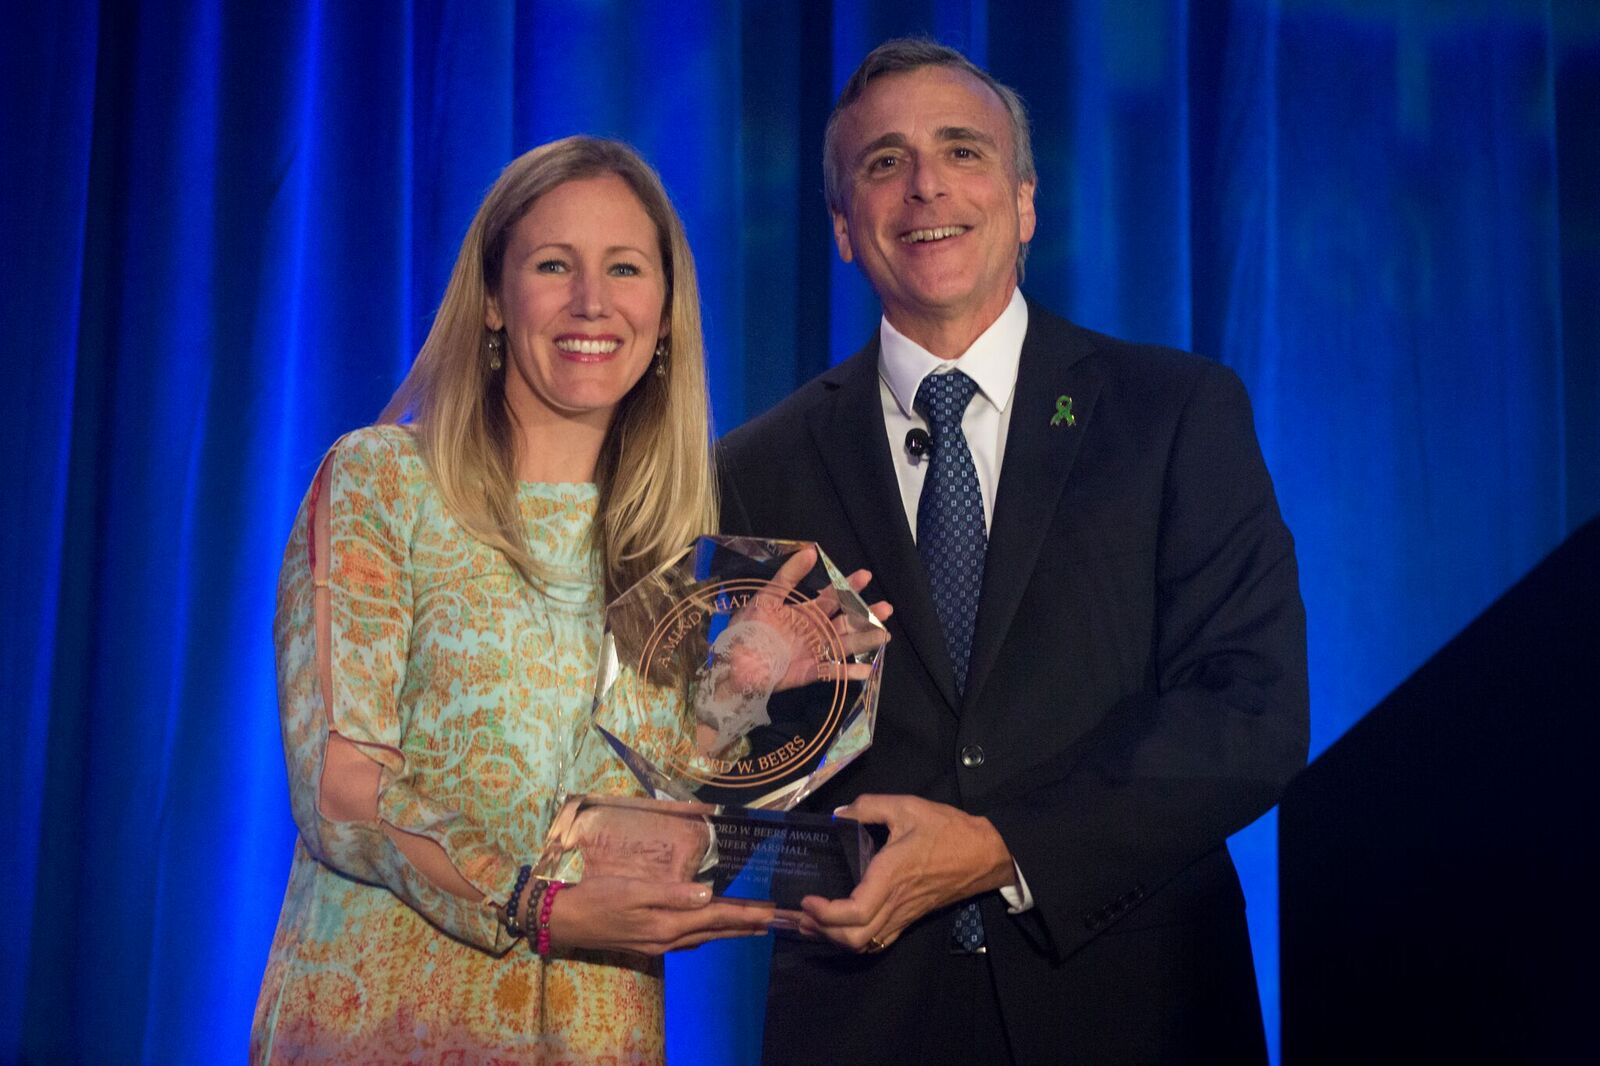 Jennifer Marshall - 2018 Clifford Beers Award winner - stands holding award with Paul Gionfriddo, former MHA President and CEO